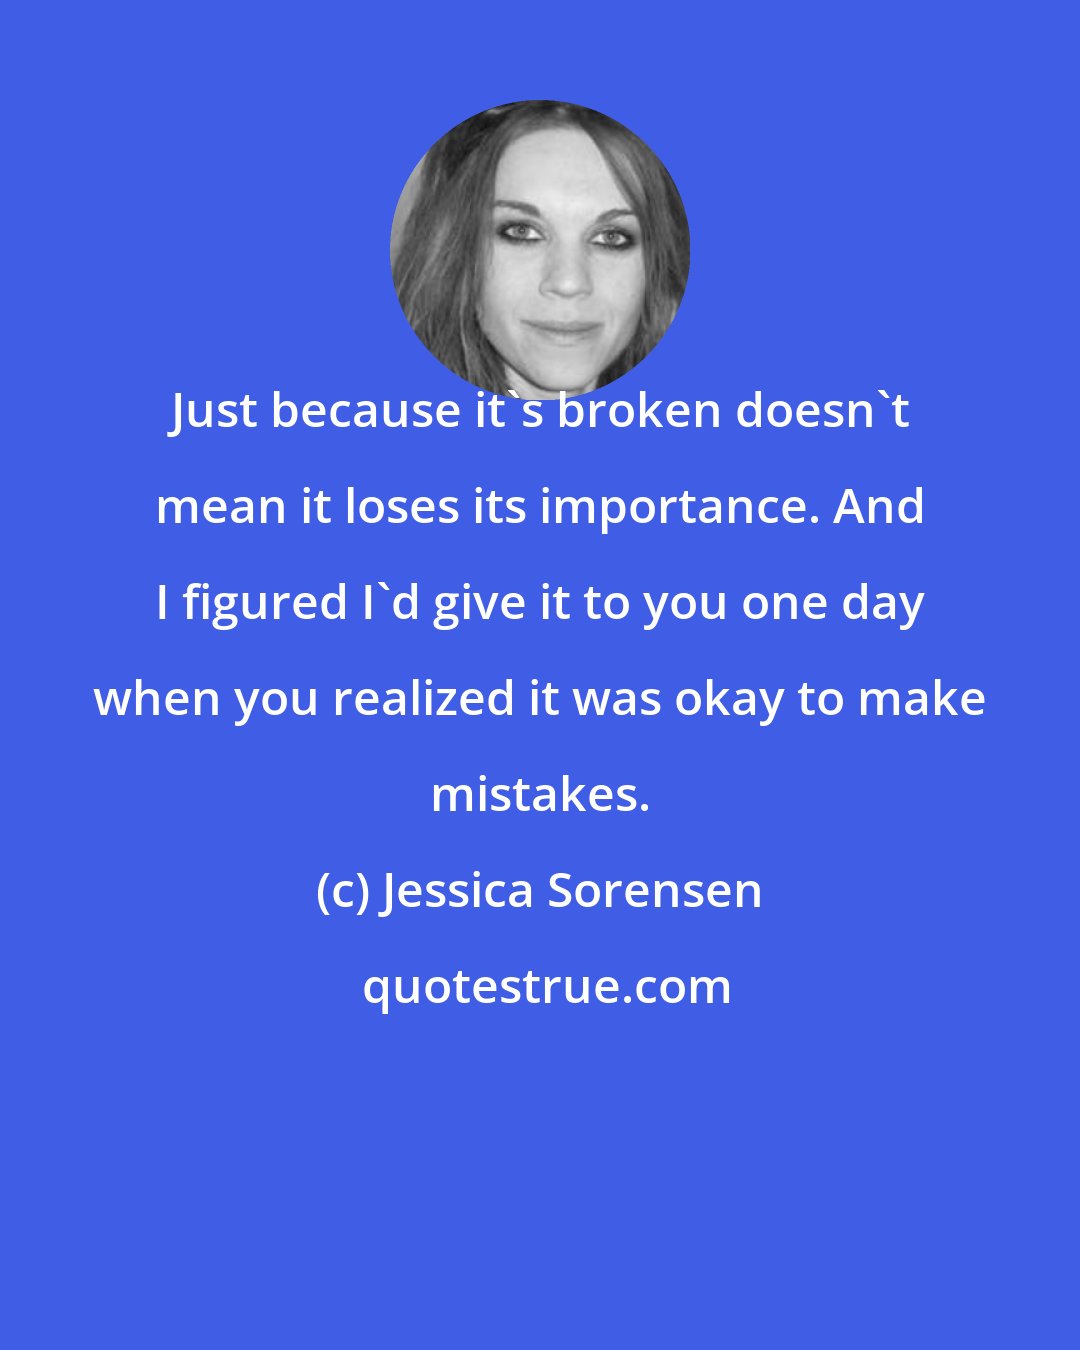 Jessica Sorensen: Just because it's broken doesn't mean it loses its importance. And I figured I'd give it to you one day when you realized it was okay to make mistakes.